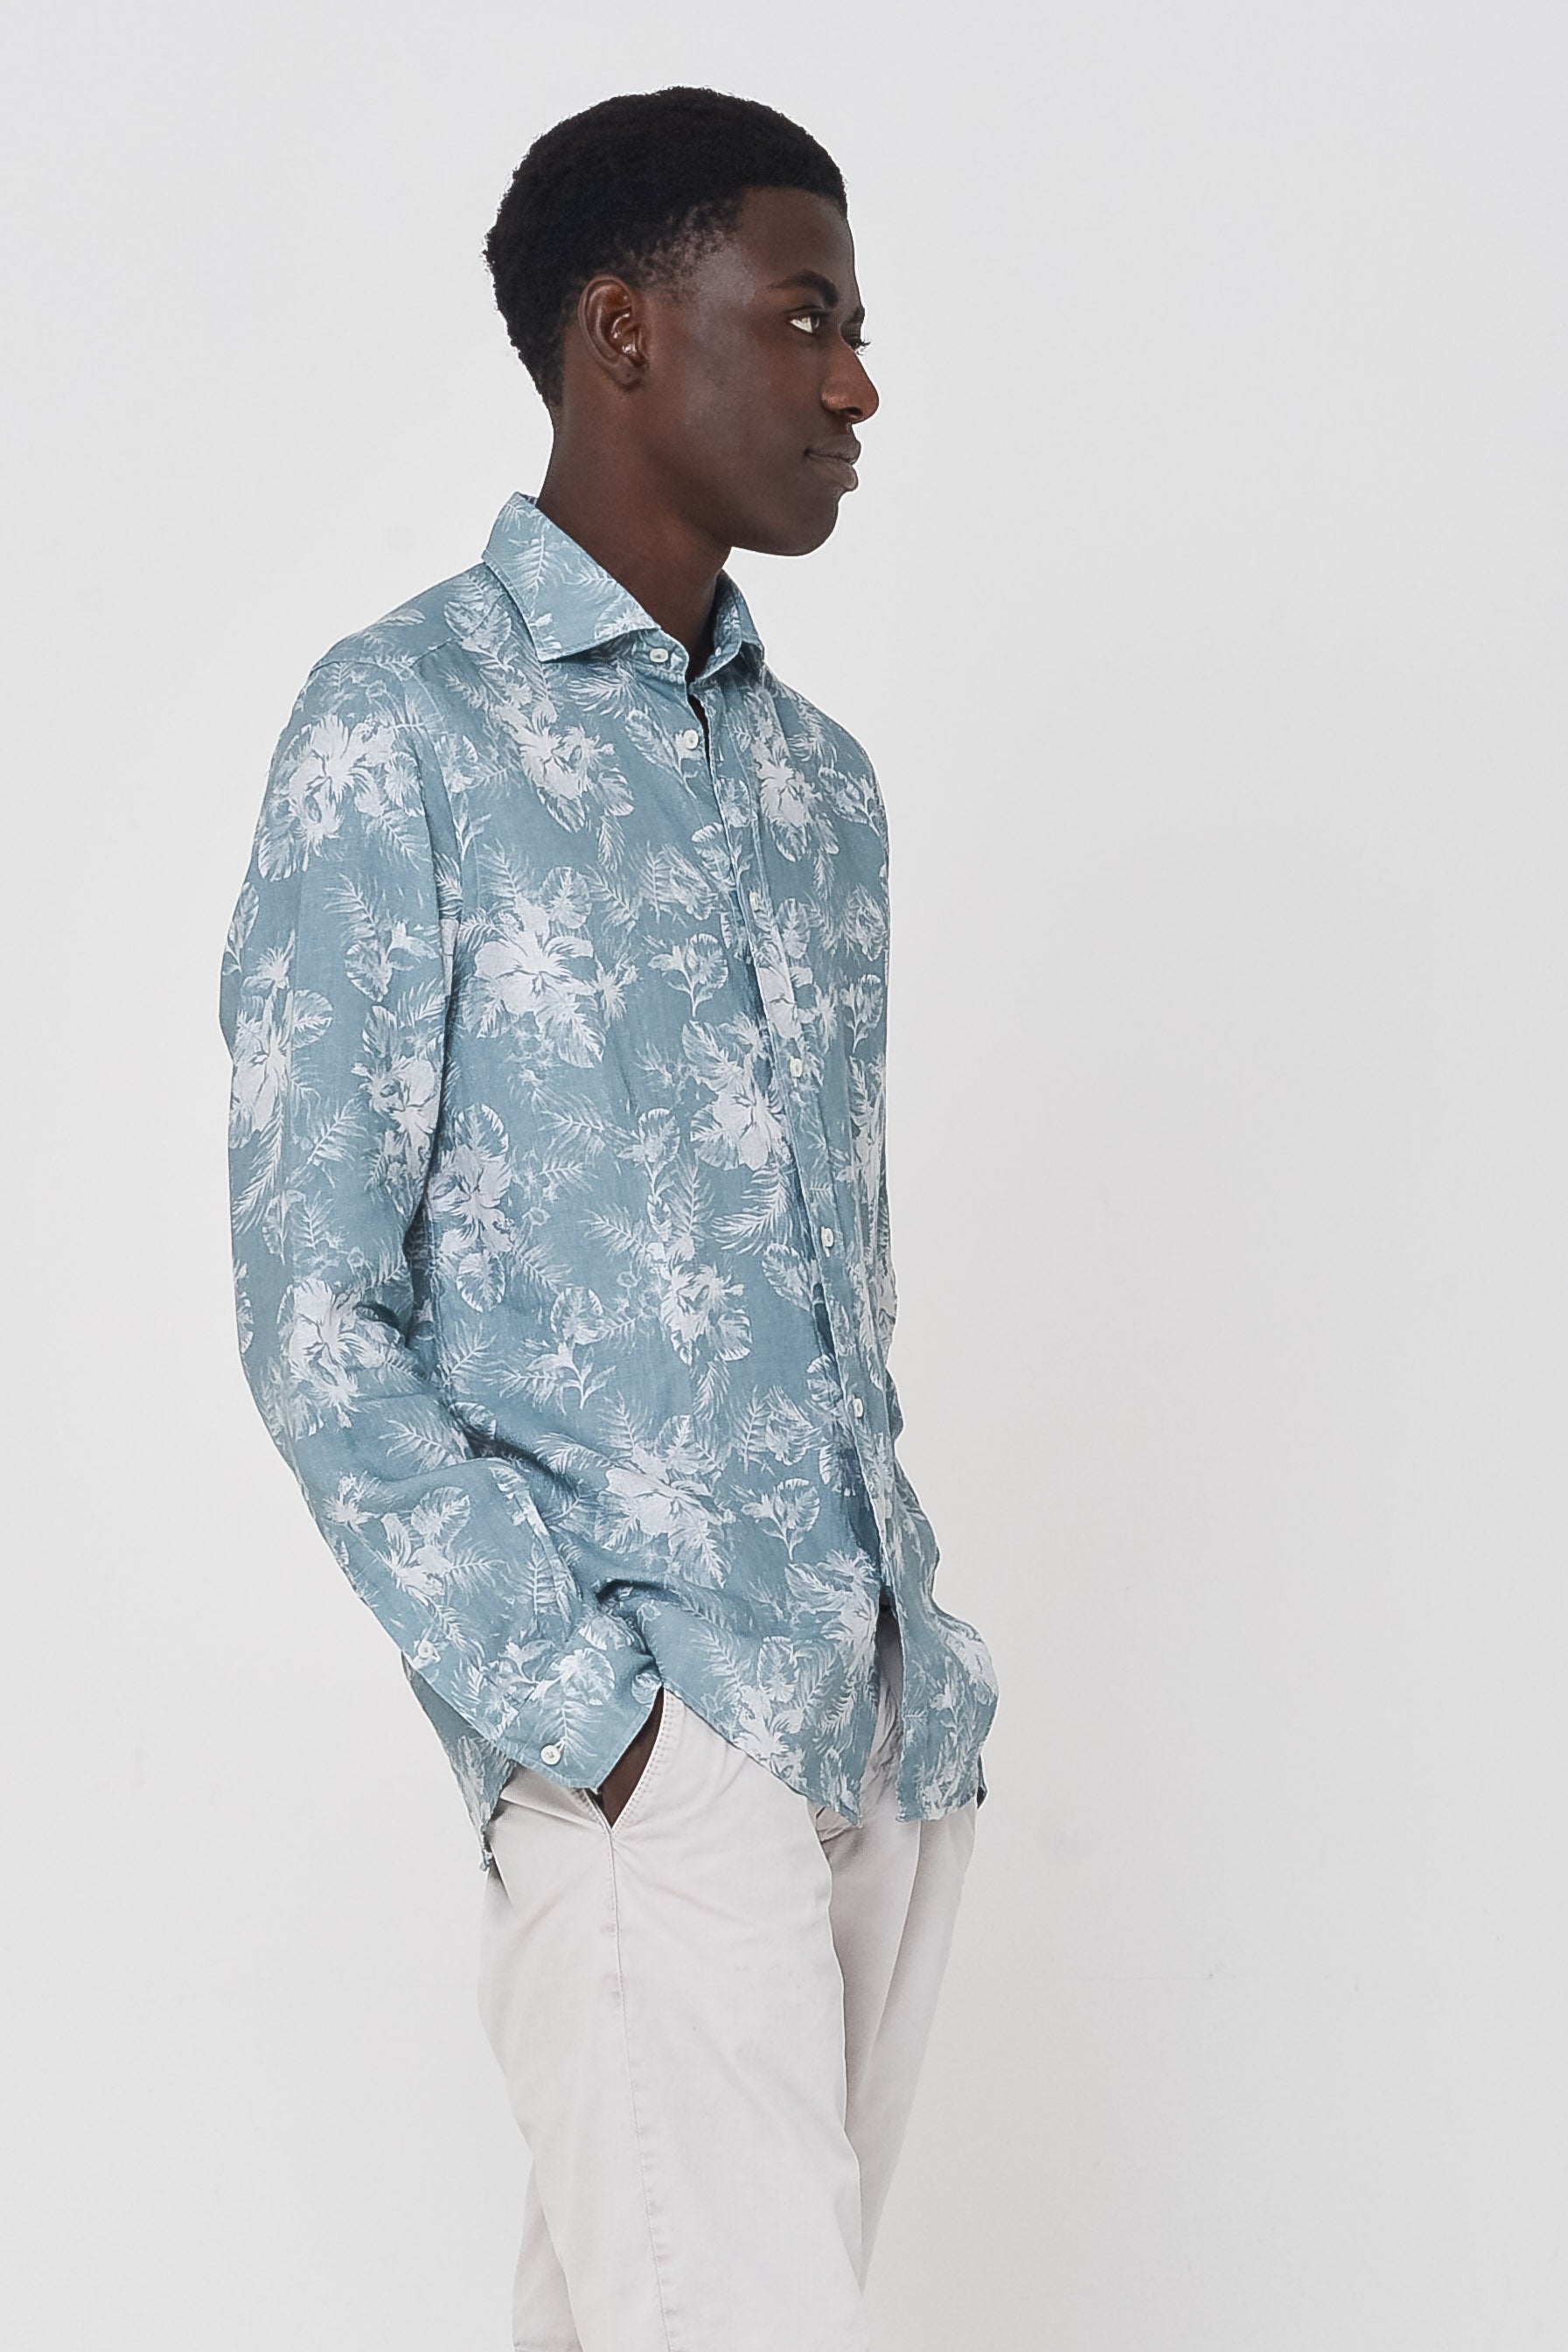 Slim Fit Linen Shirt in Hibiscus Pattern - Shirts